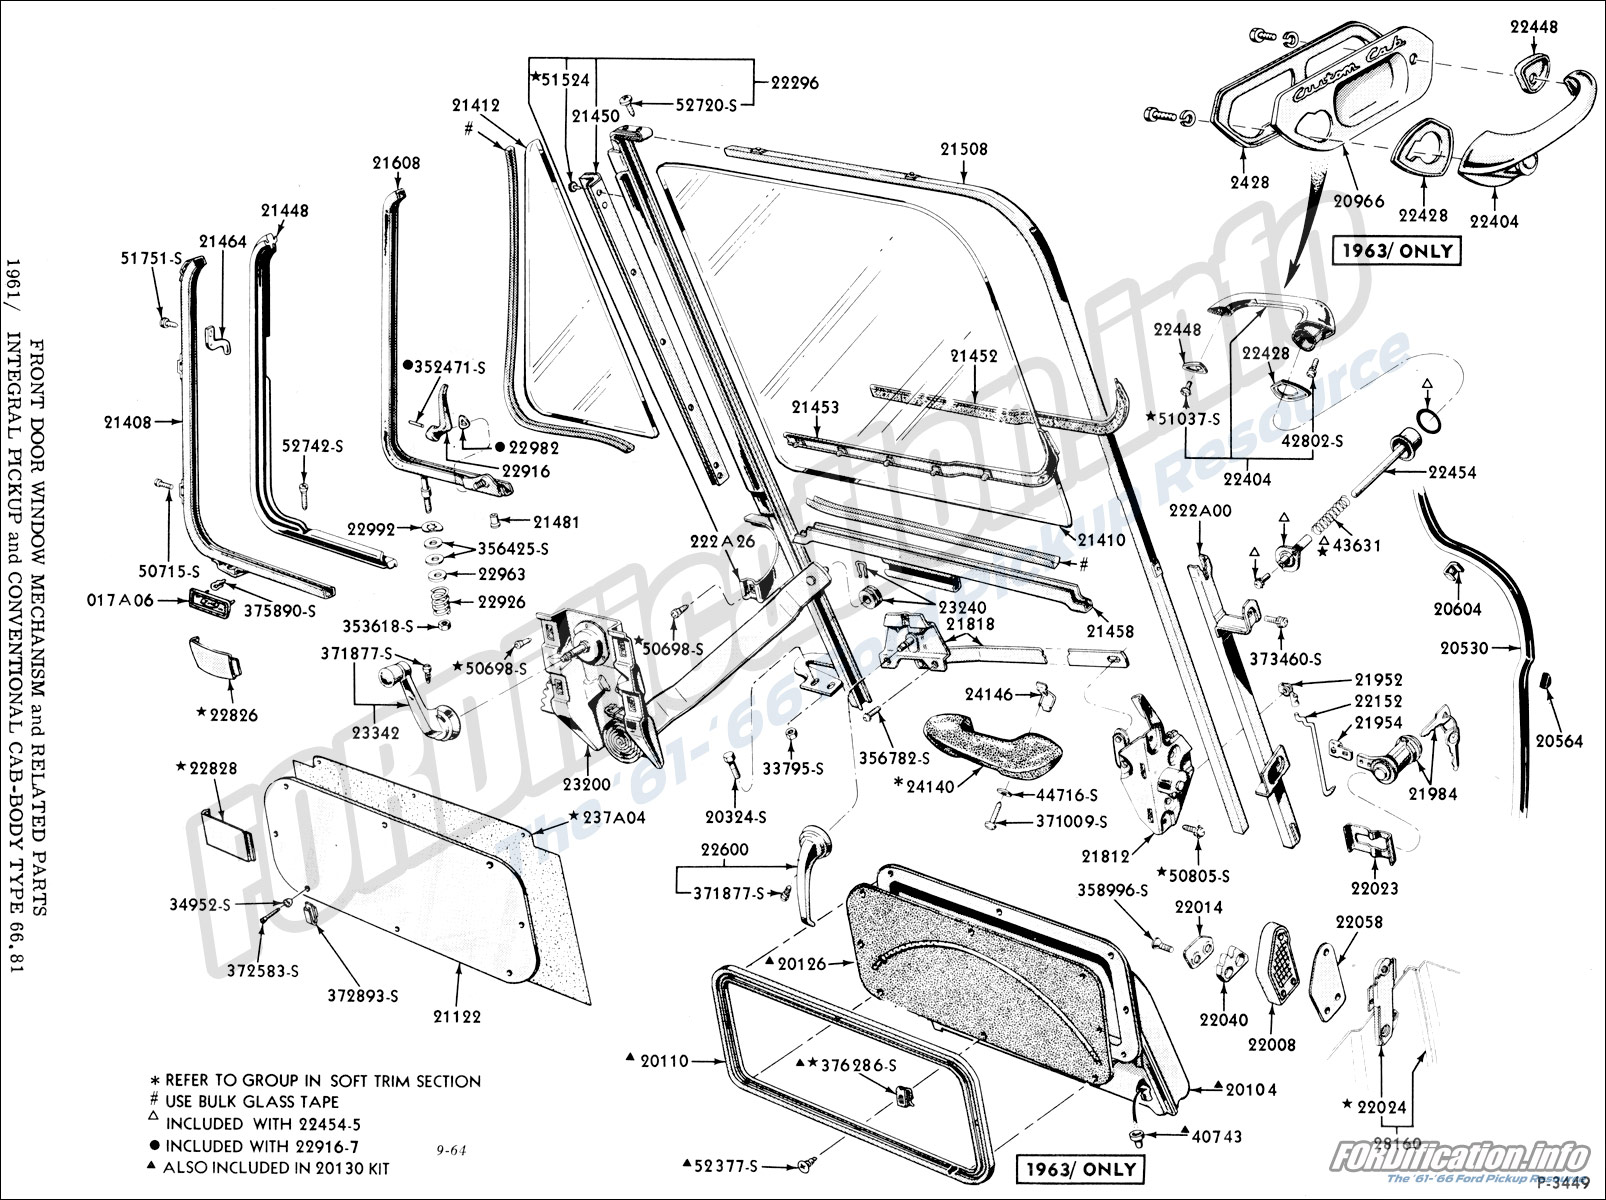 Frame & Body Schematics - FORDification.info - The '61-'66 Ford Pickup